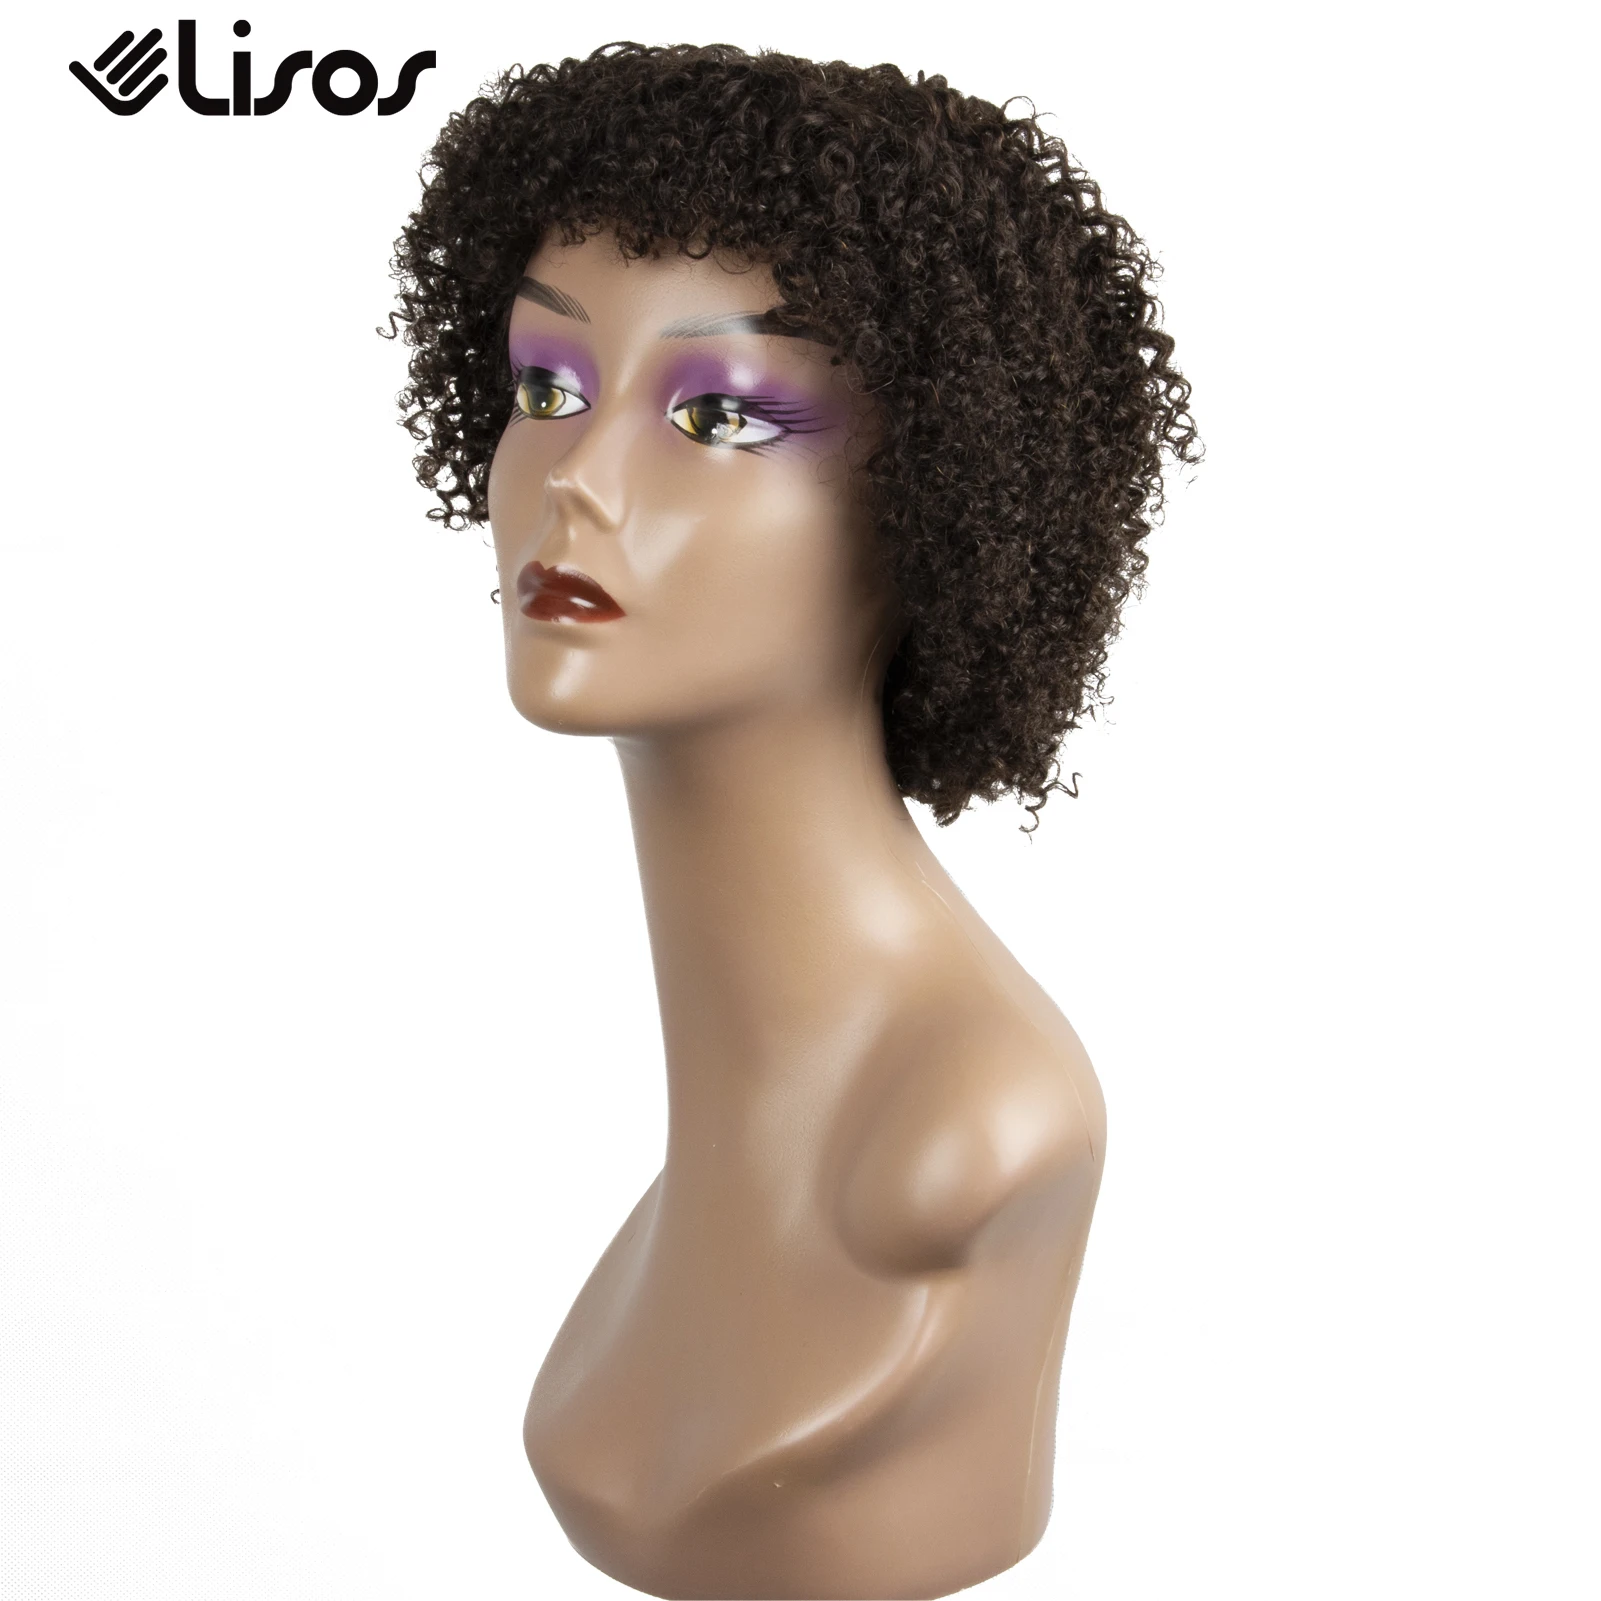 

2# Light Brown Pixie Cut Bob Short Curly Wig with Bangs Remy Brazilian Human Hair Afro Kinky Curly Human Hair Full Fringe Wigs, Ombre brown bob wig